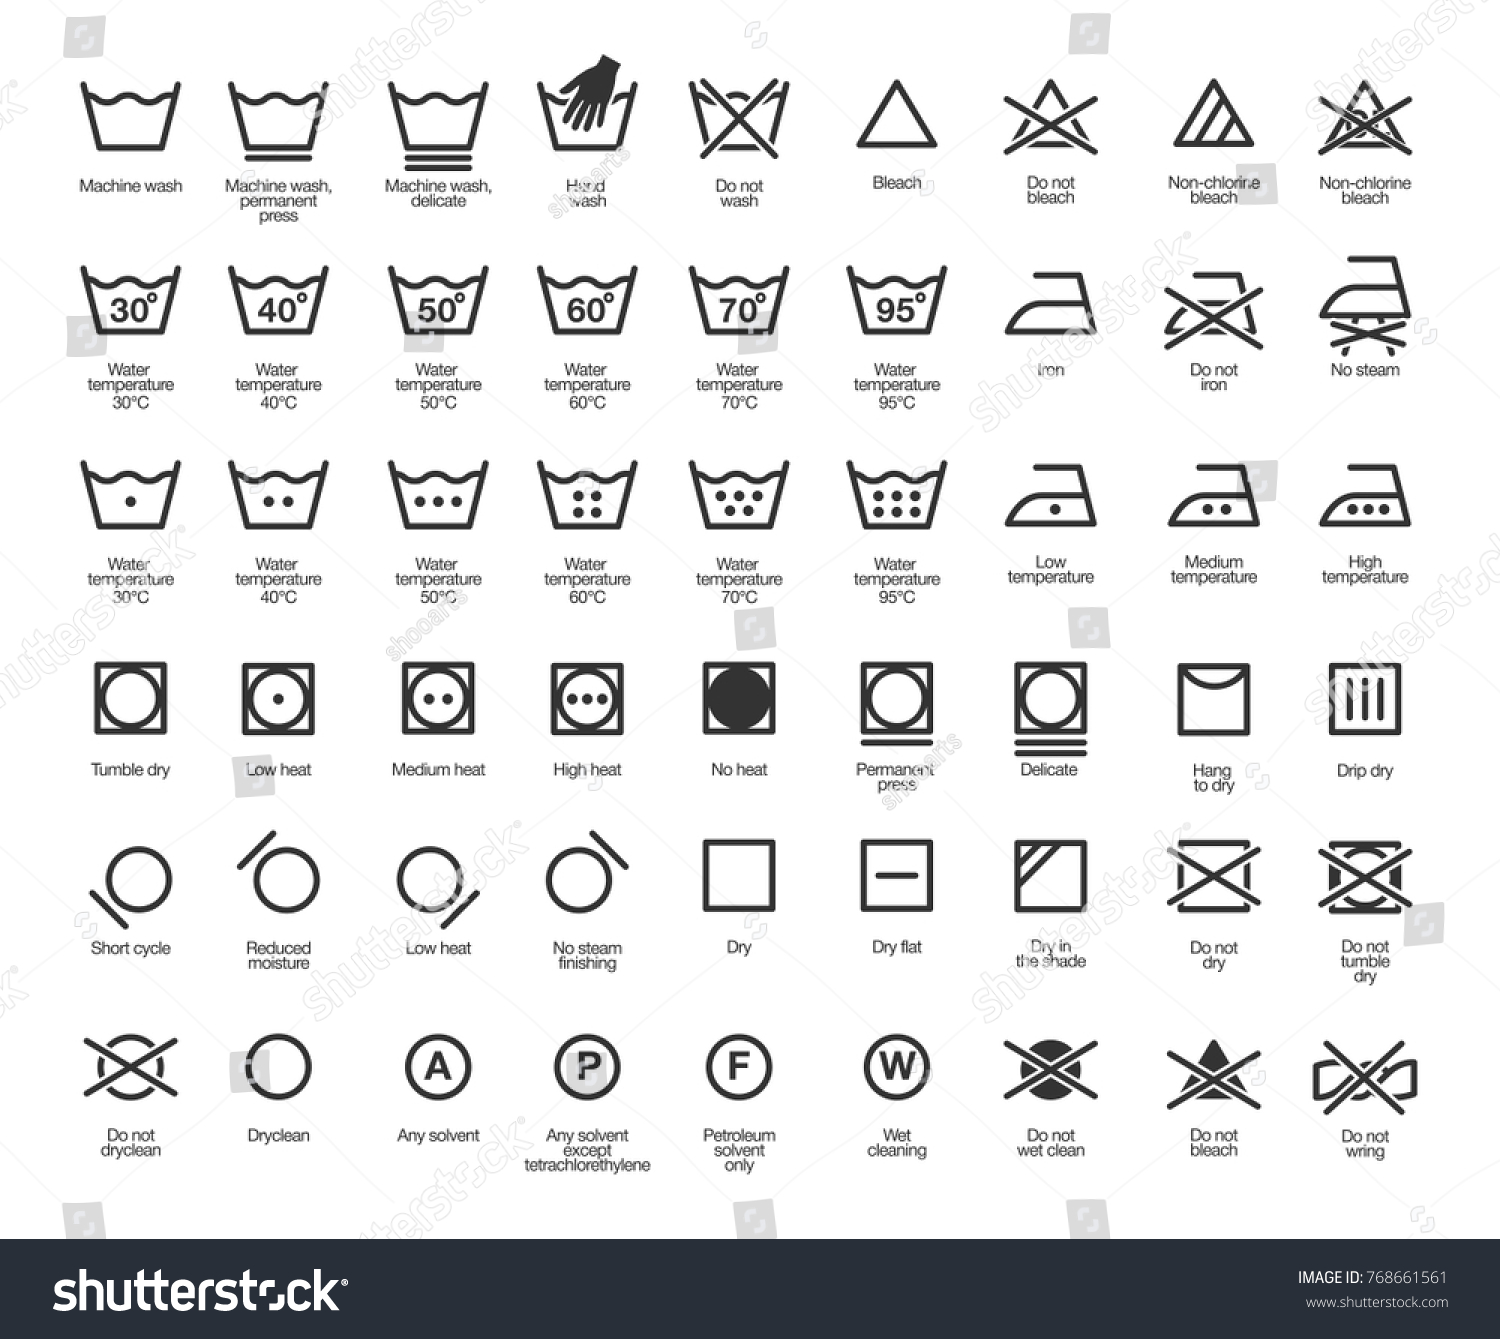 Laundry Vector Icons set, full collection #768661561